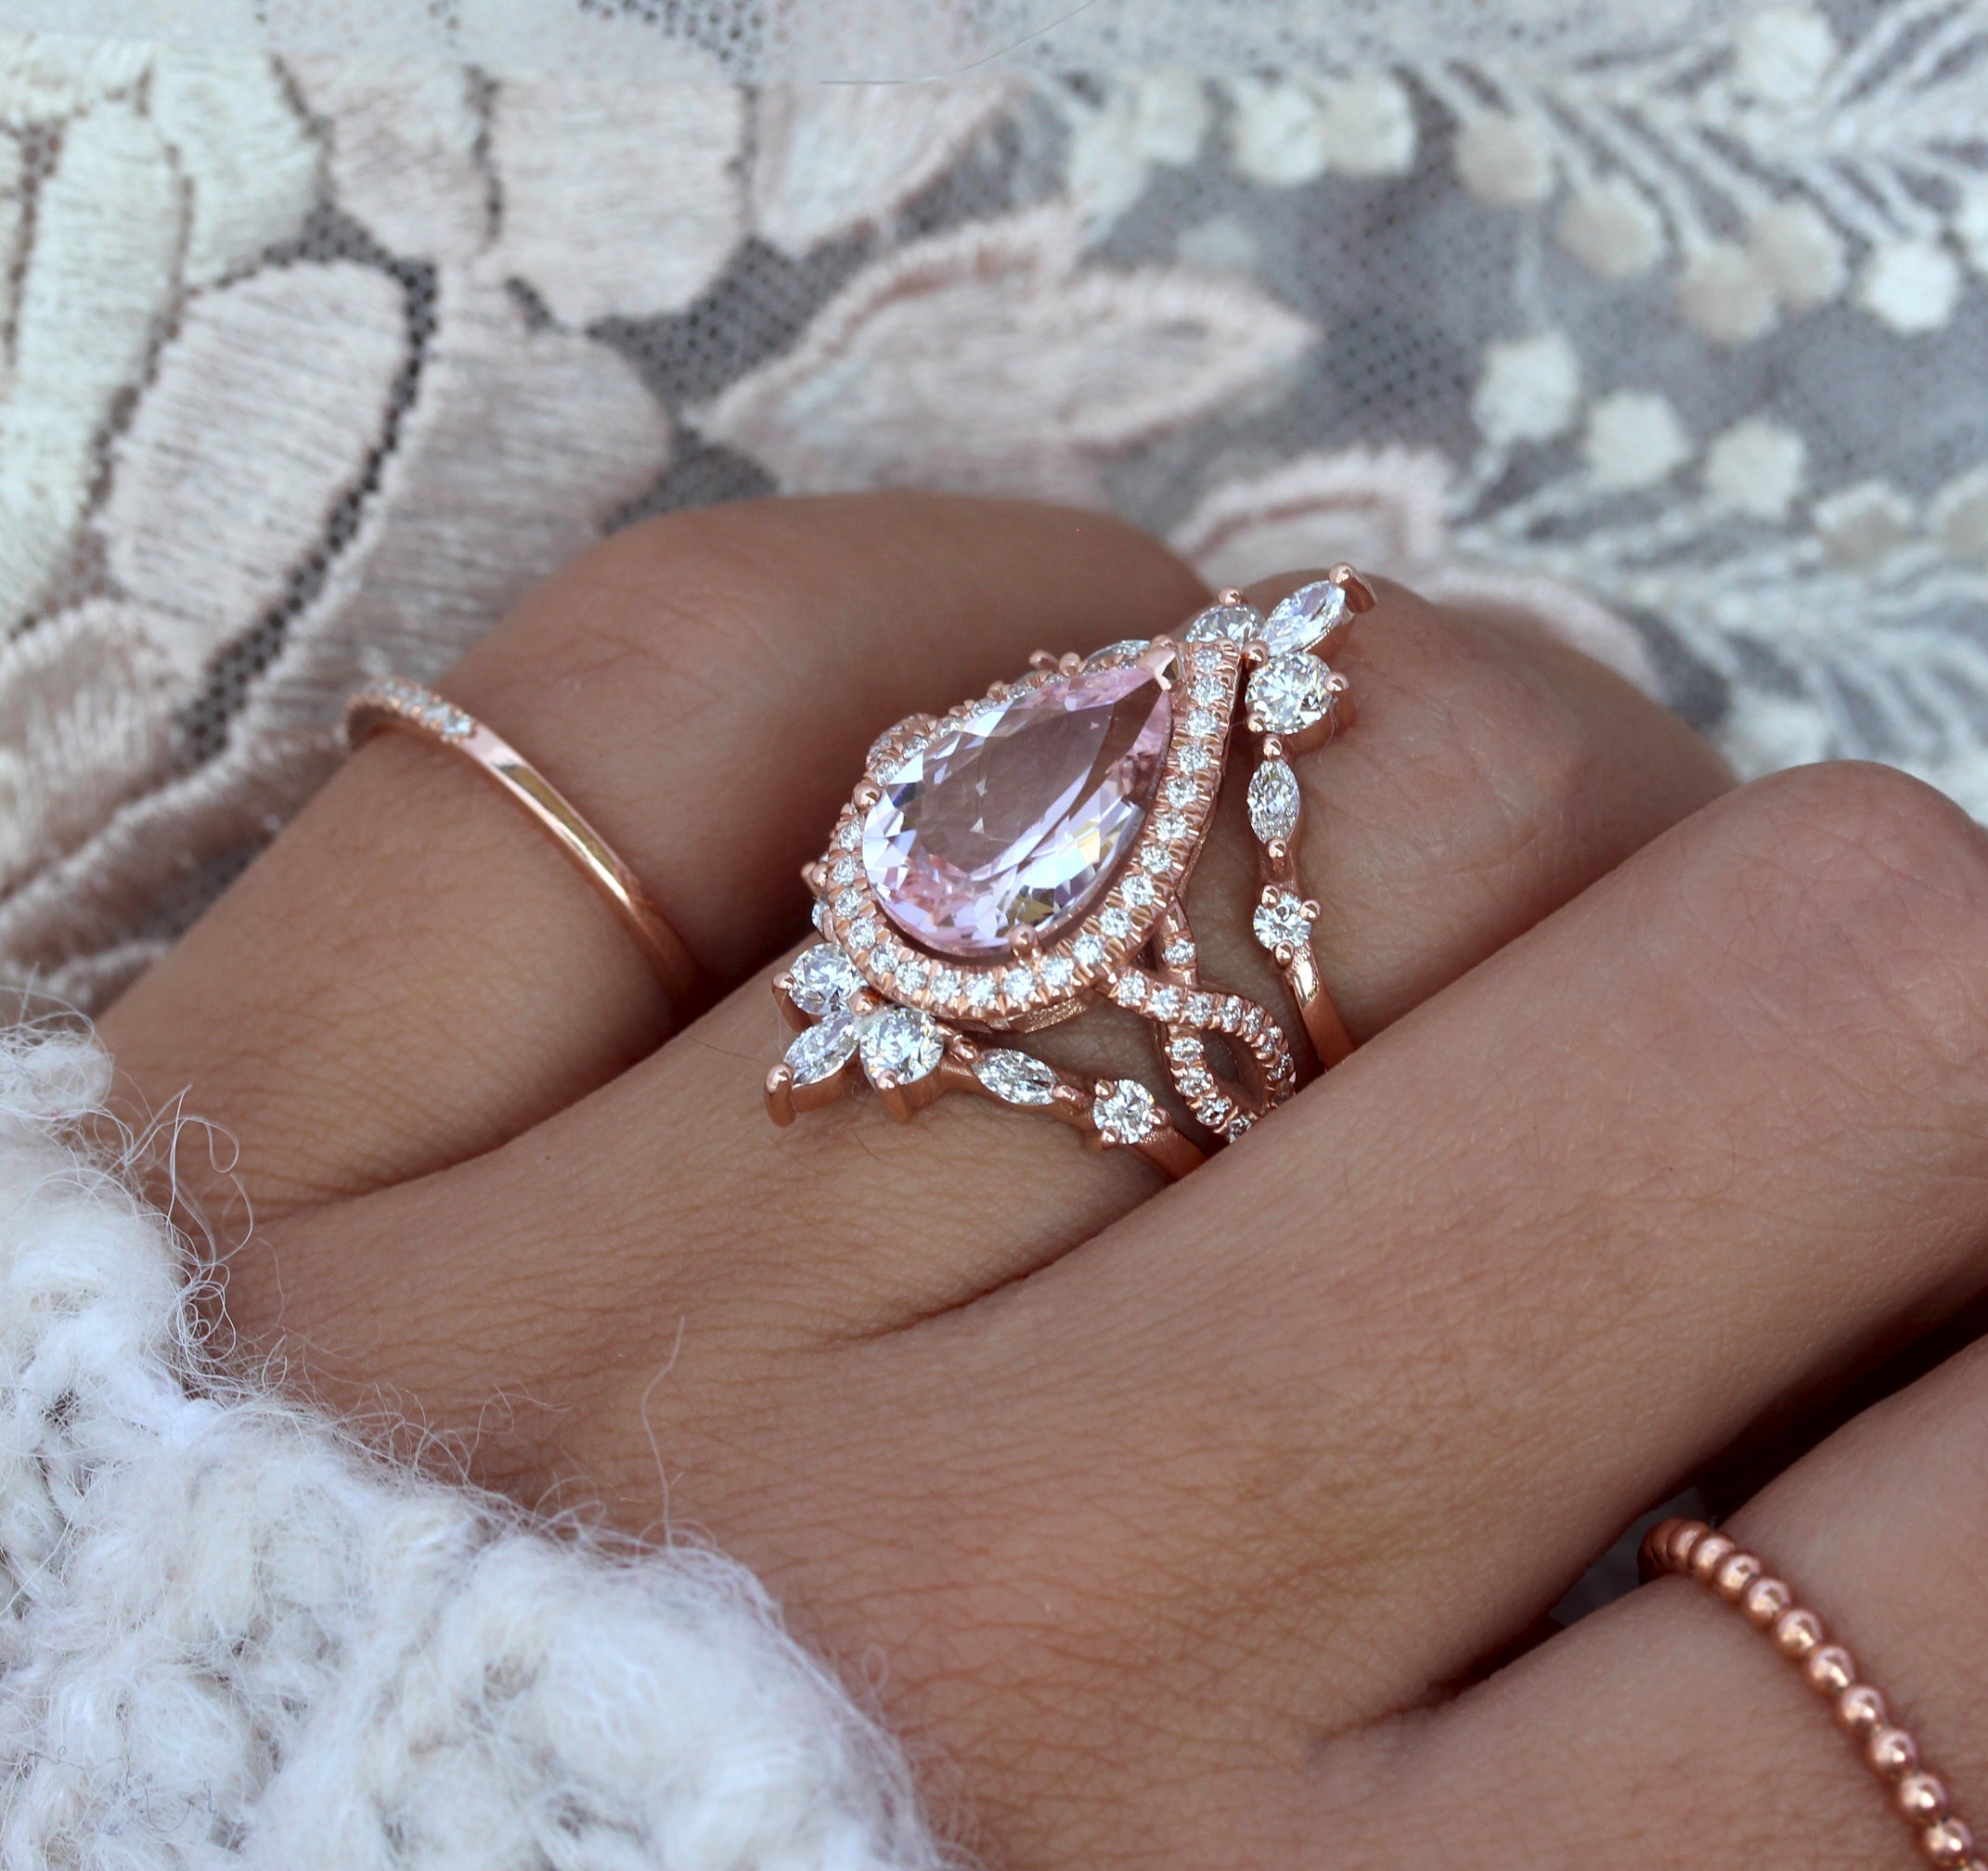 3 carats Pear Pink Morganite, Twist Shank Band Engagement Ring - "Elise" with Iceland Ring guard ♥